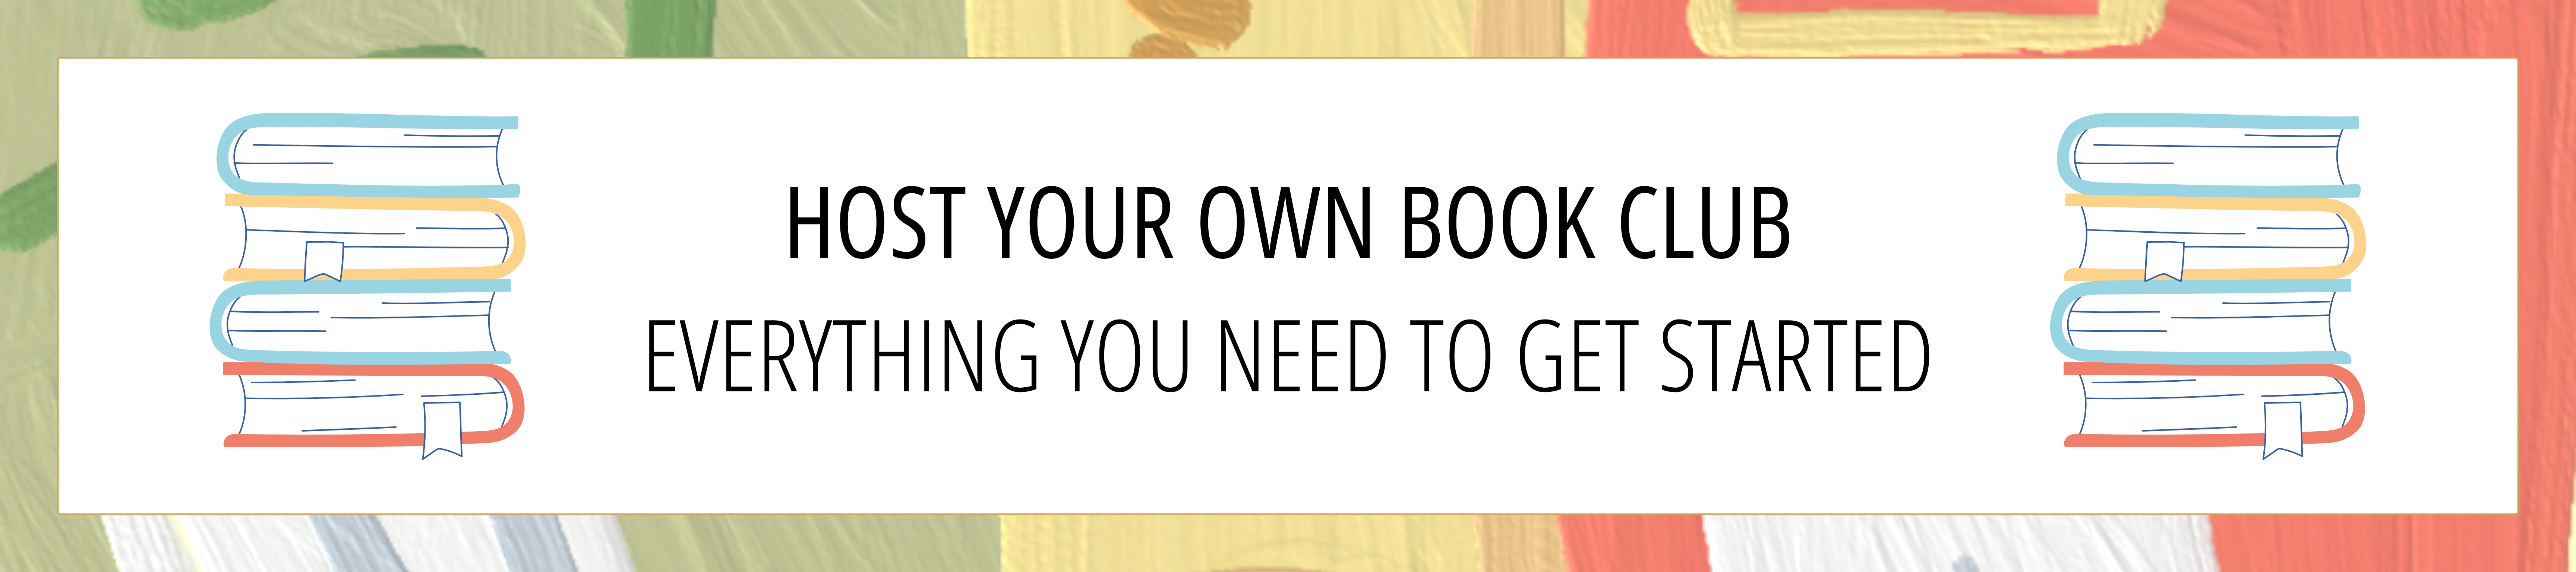 Host Your Own Book Club Slider